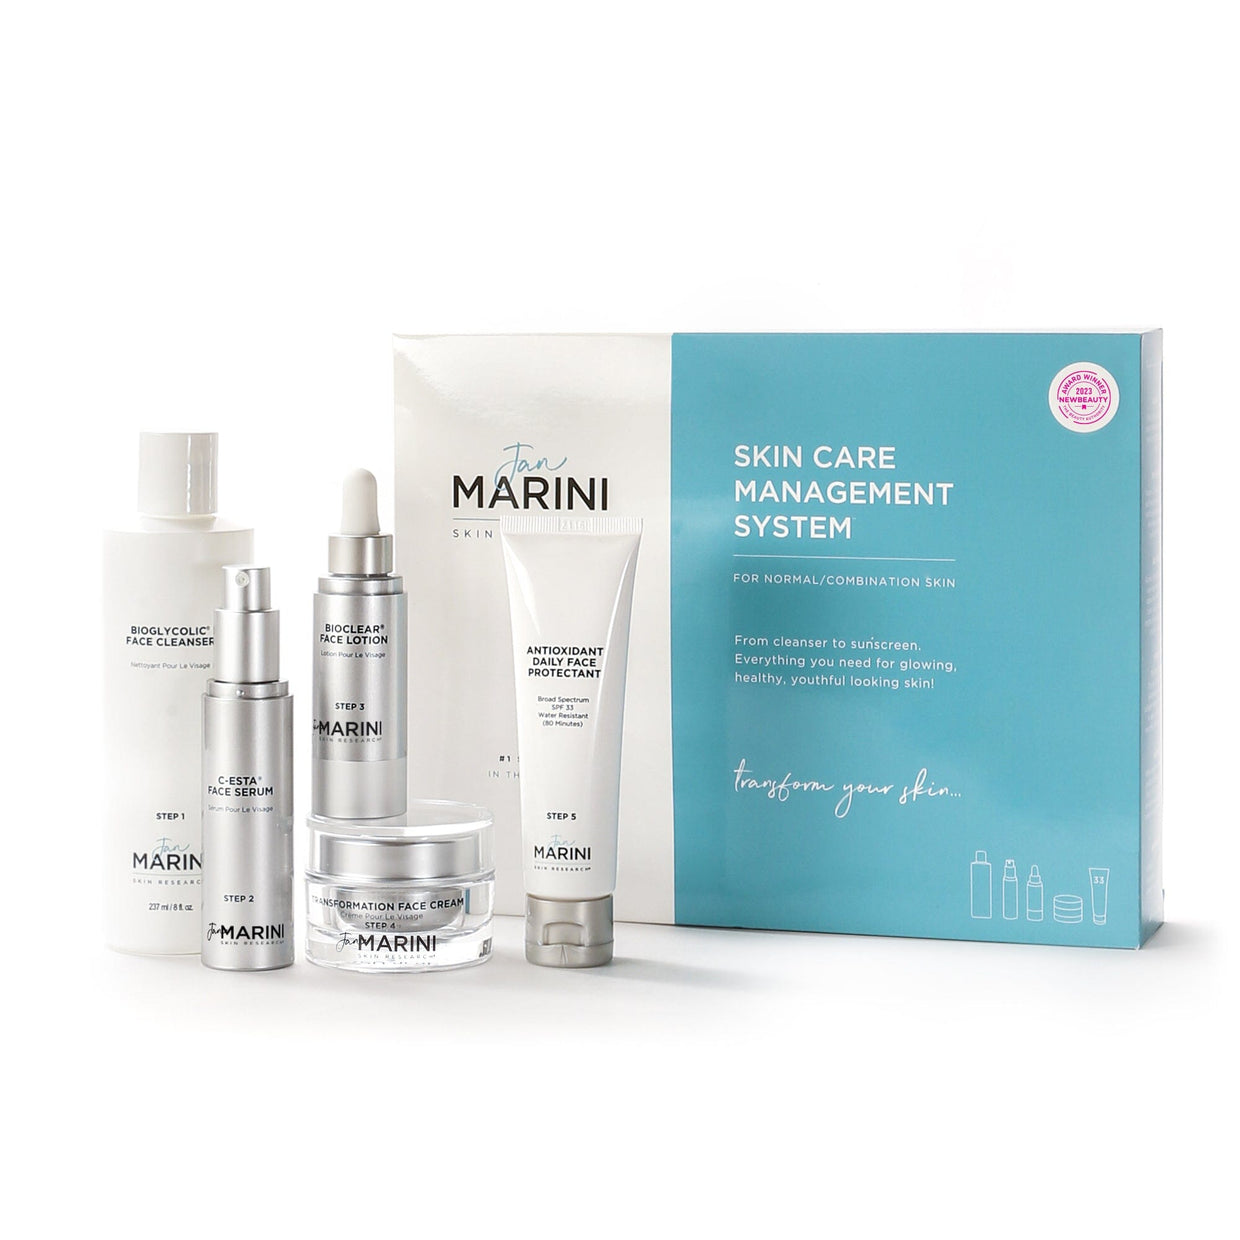 Jan Marini Skin Care Management System - Normal/Combination Skin with Antioxidant Daily Face Protectant SPF 33 Anti-Aging Skin Care Kits Jan Marini Shop at Exclusive Beauty Club